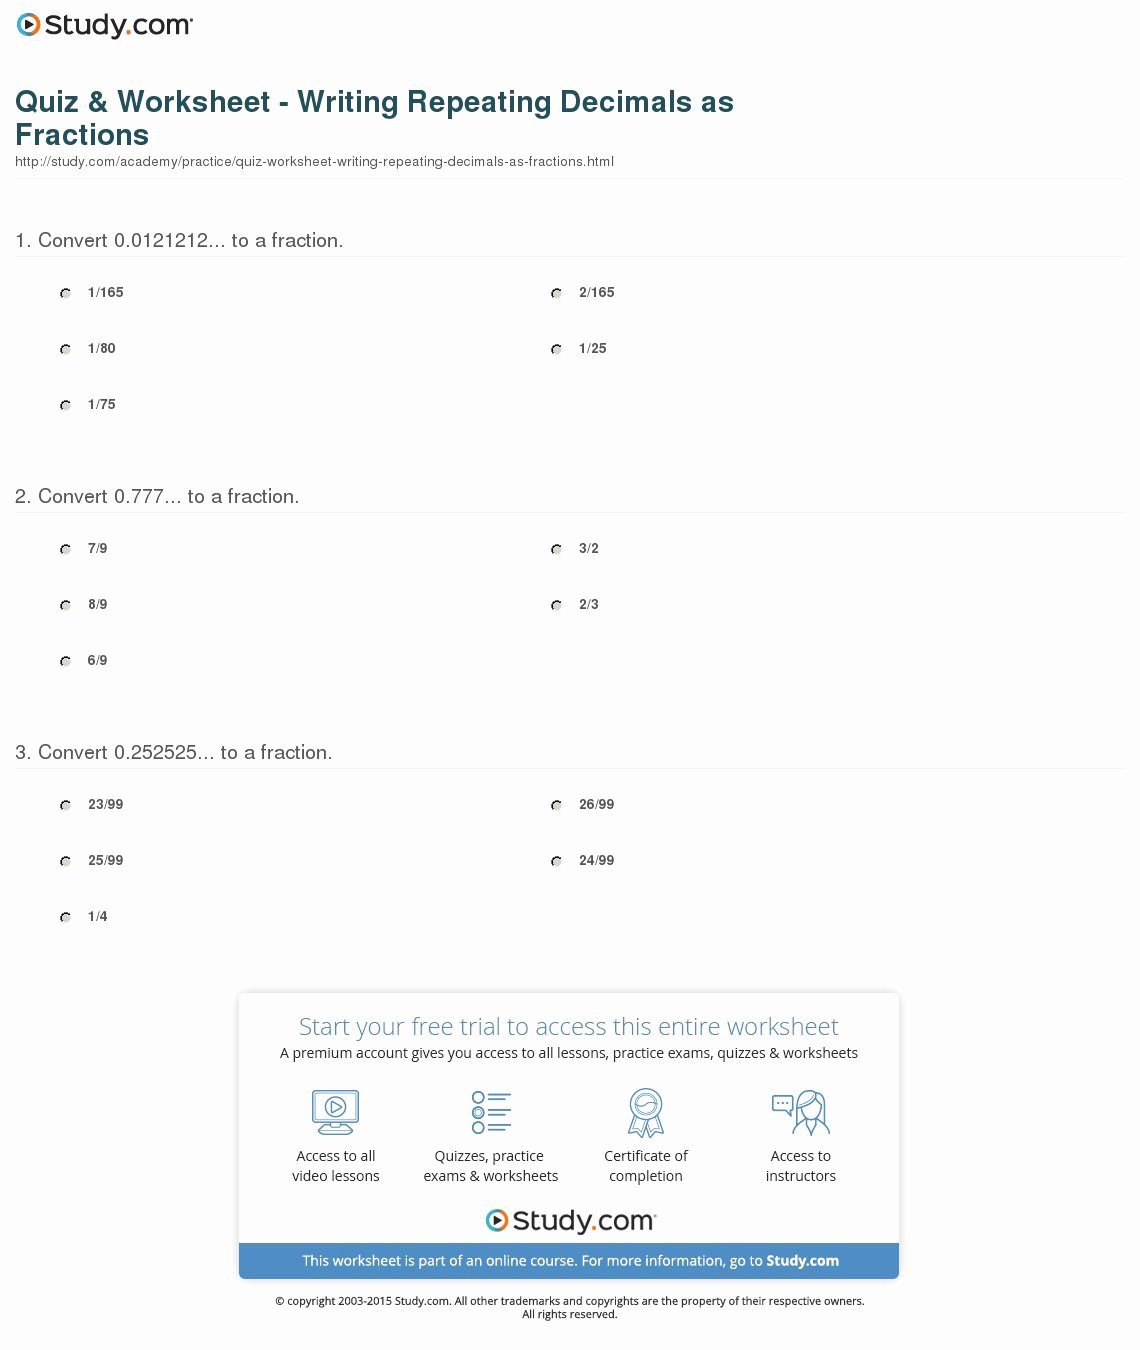 Repeating Decimals to Fractions Worksheet Unique Quiz &amp; Worksheet Writing Repeating Decimals as Fractions